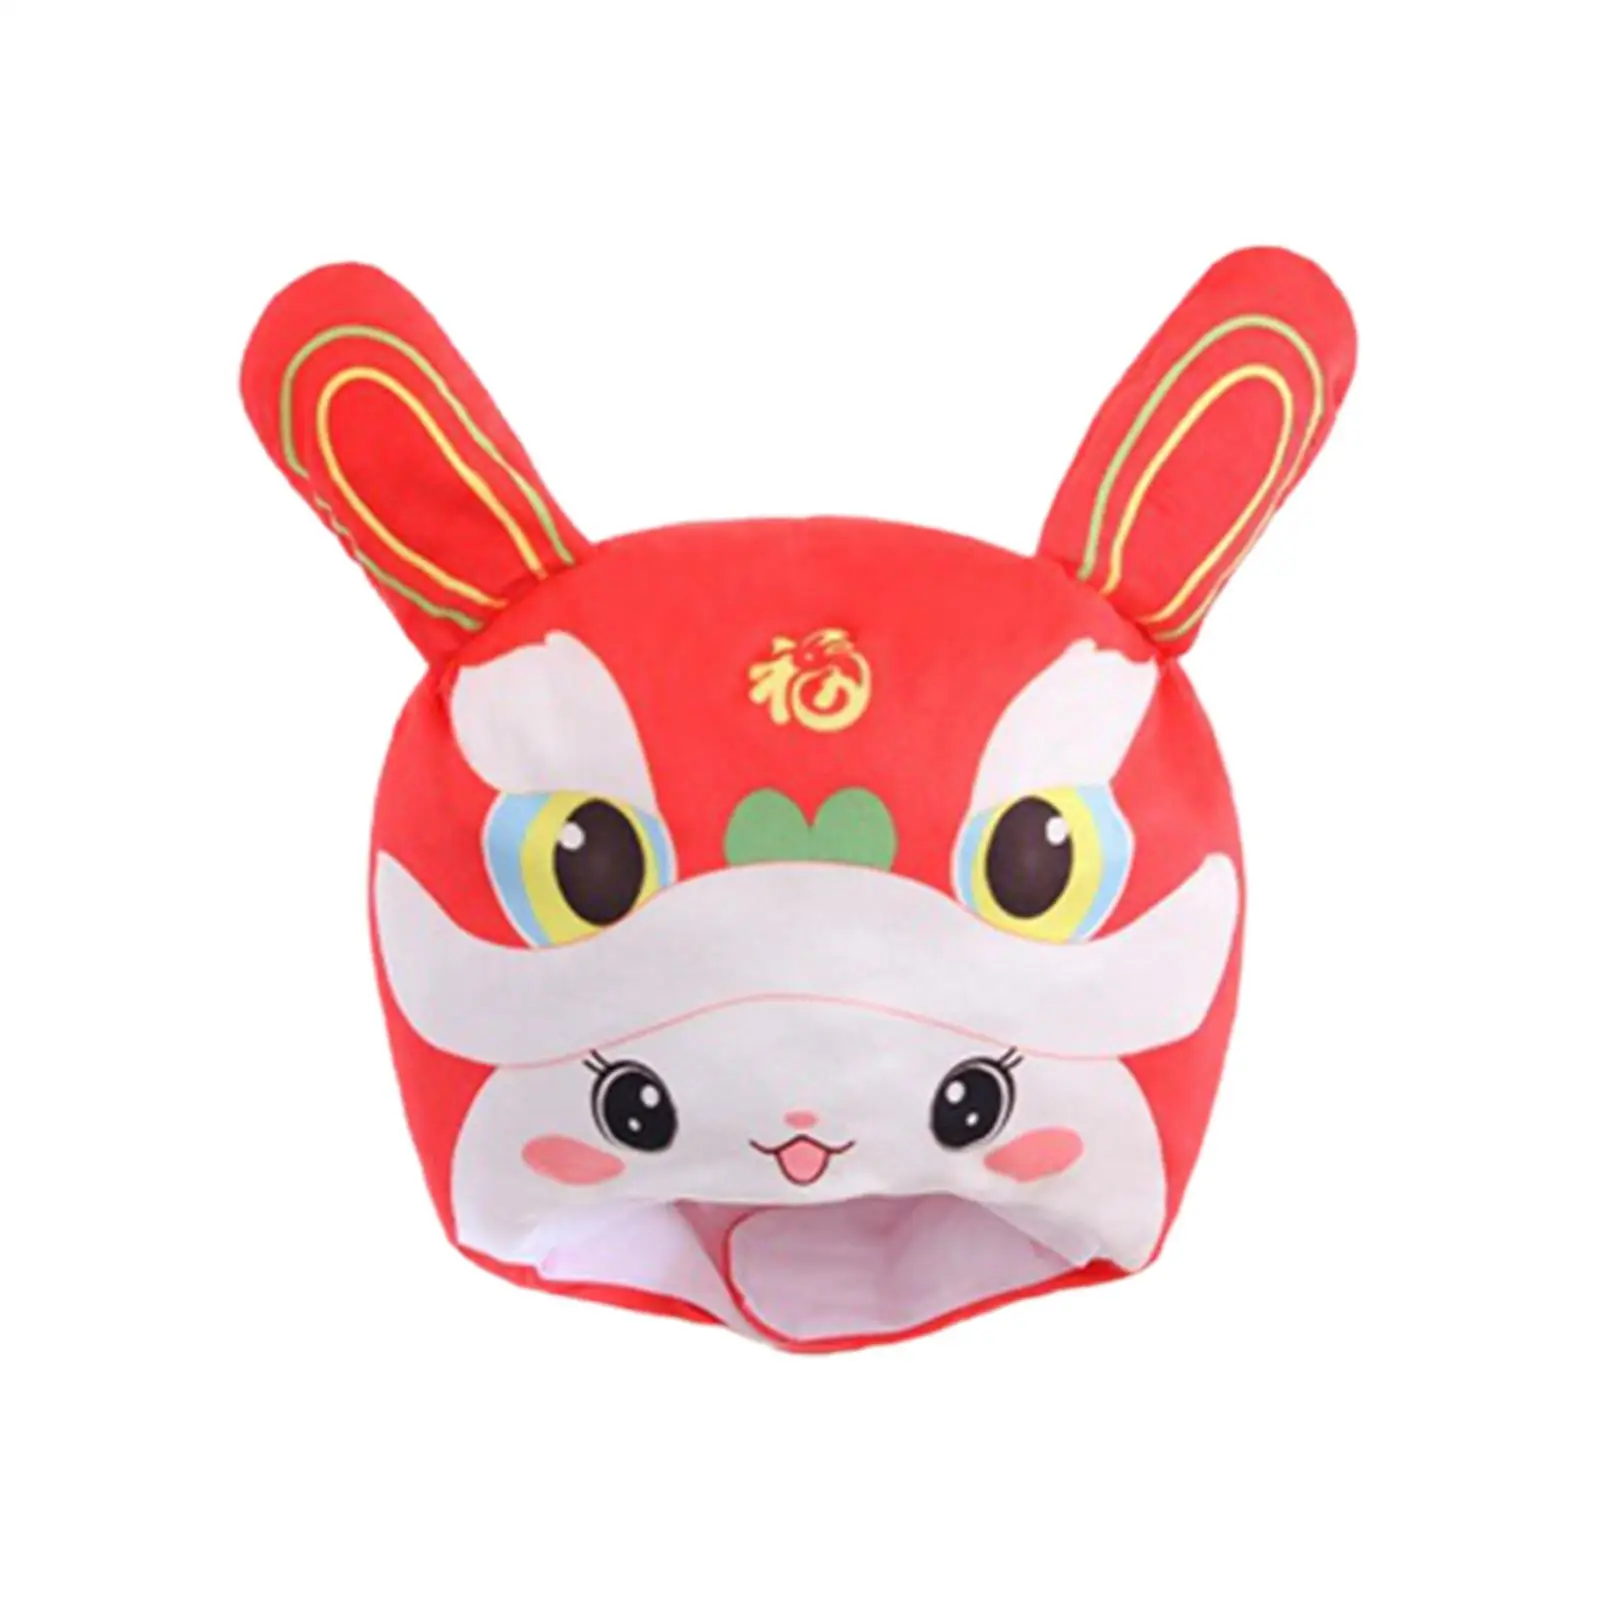 Funny Lion Rabbit Plush Hat Unisex Headgear Photo Prop Creative Gift Winter Warm for Fancy Dress Costume Party Festival New Year